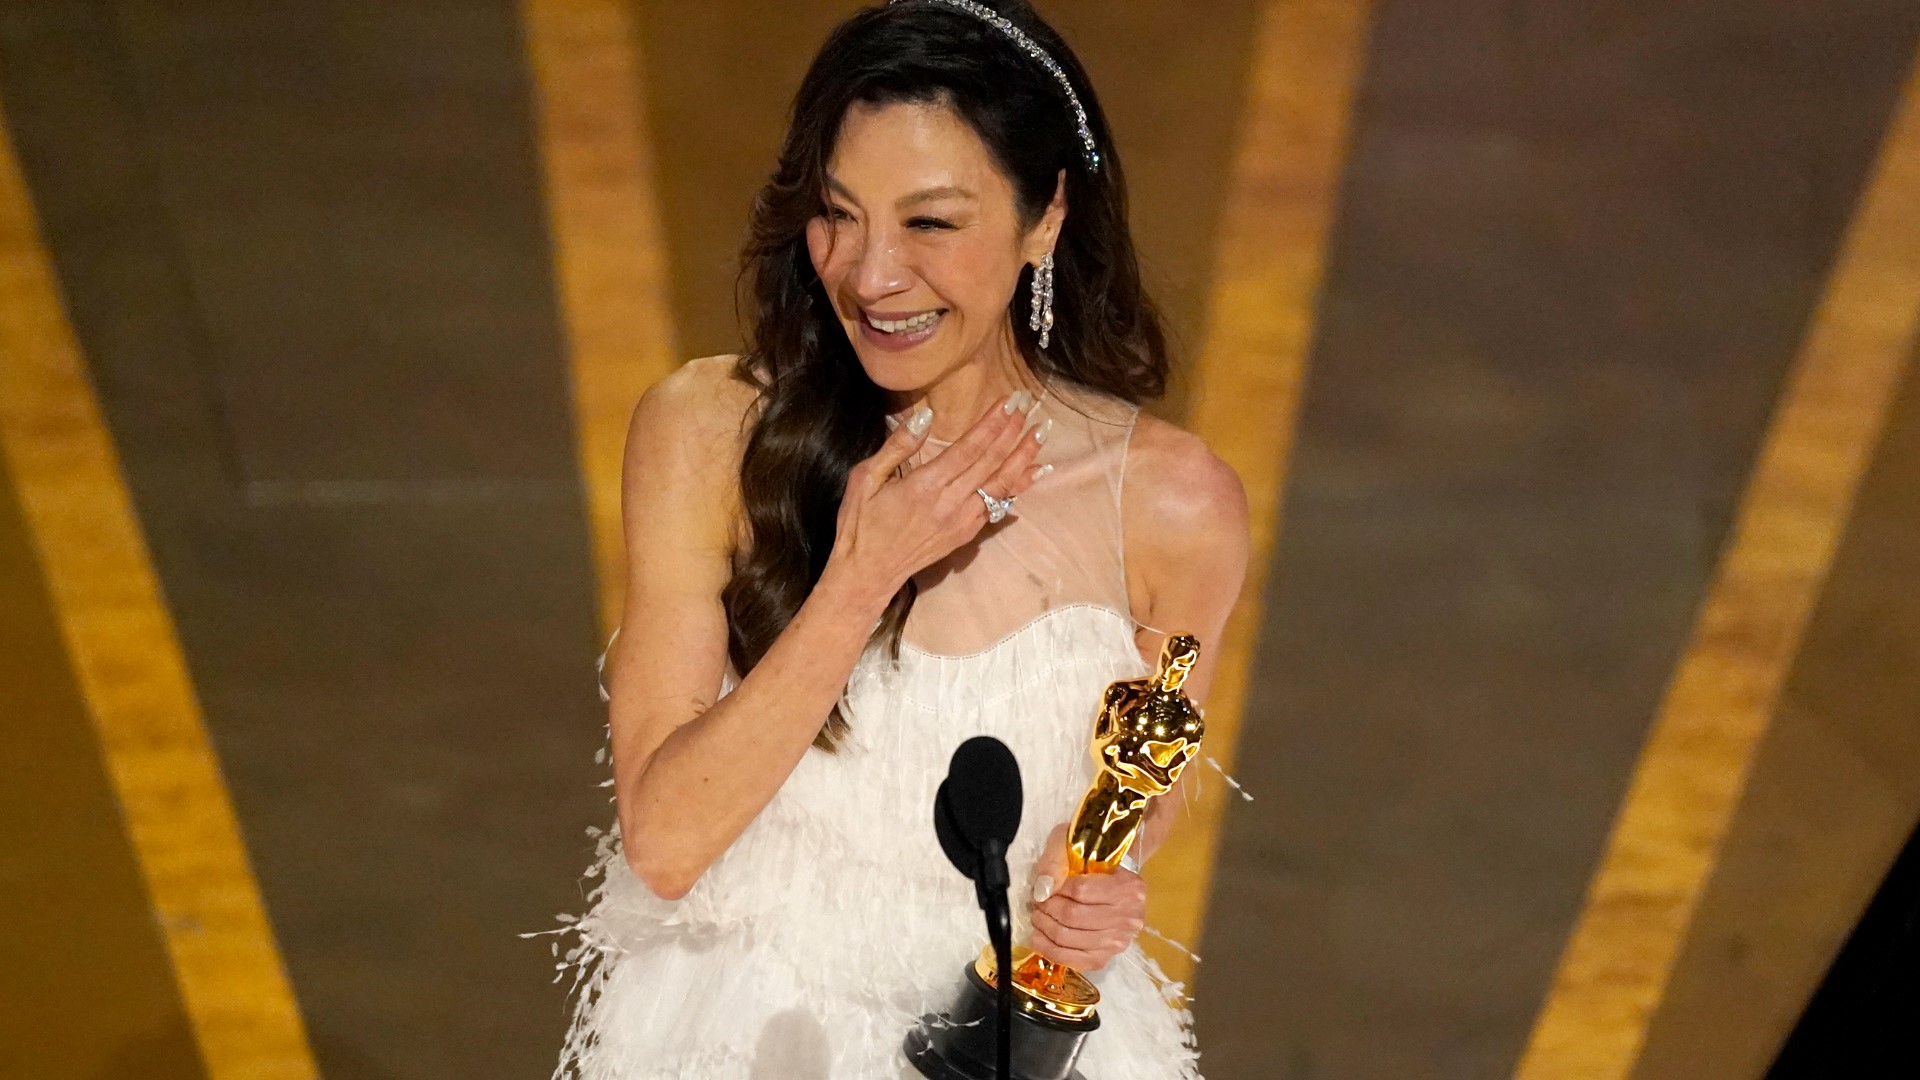 Michelle Yeoh made history, becoming the first Asian woman to take home the Oscar for Best Actress in "Everything, Everywhere, All at Once"